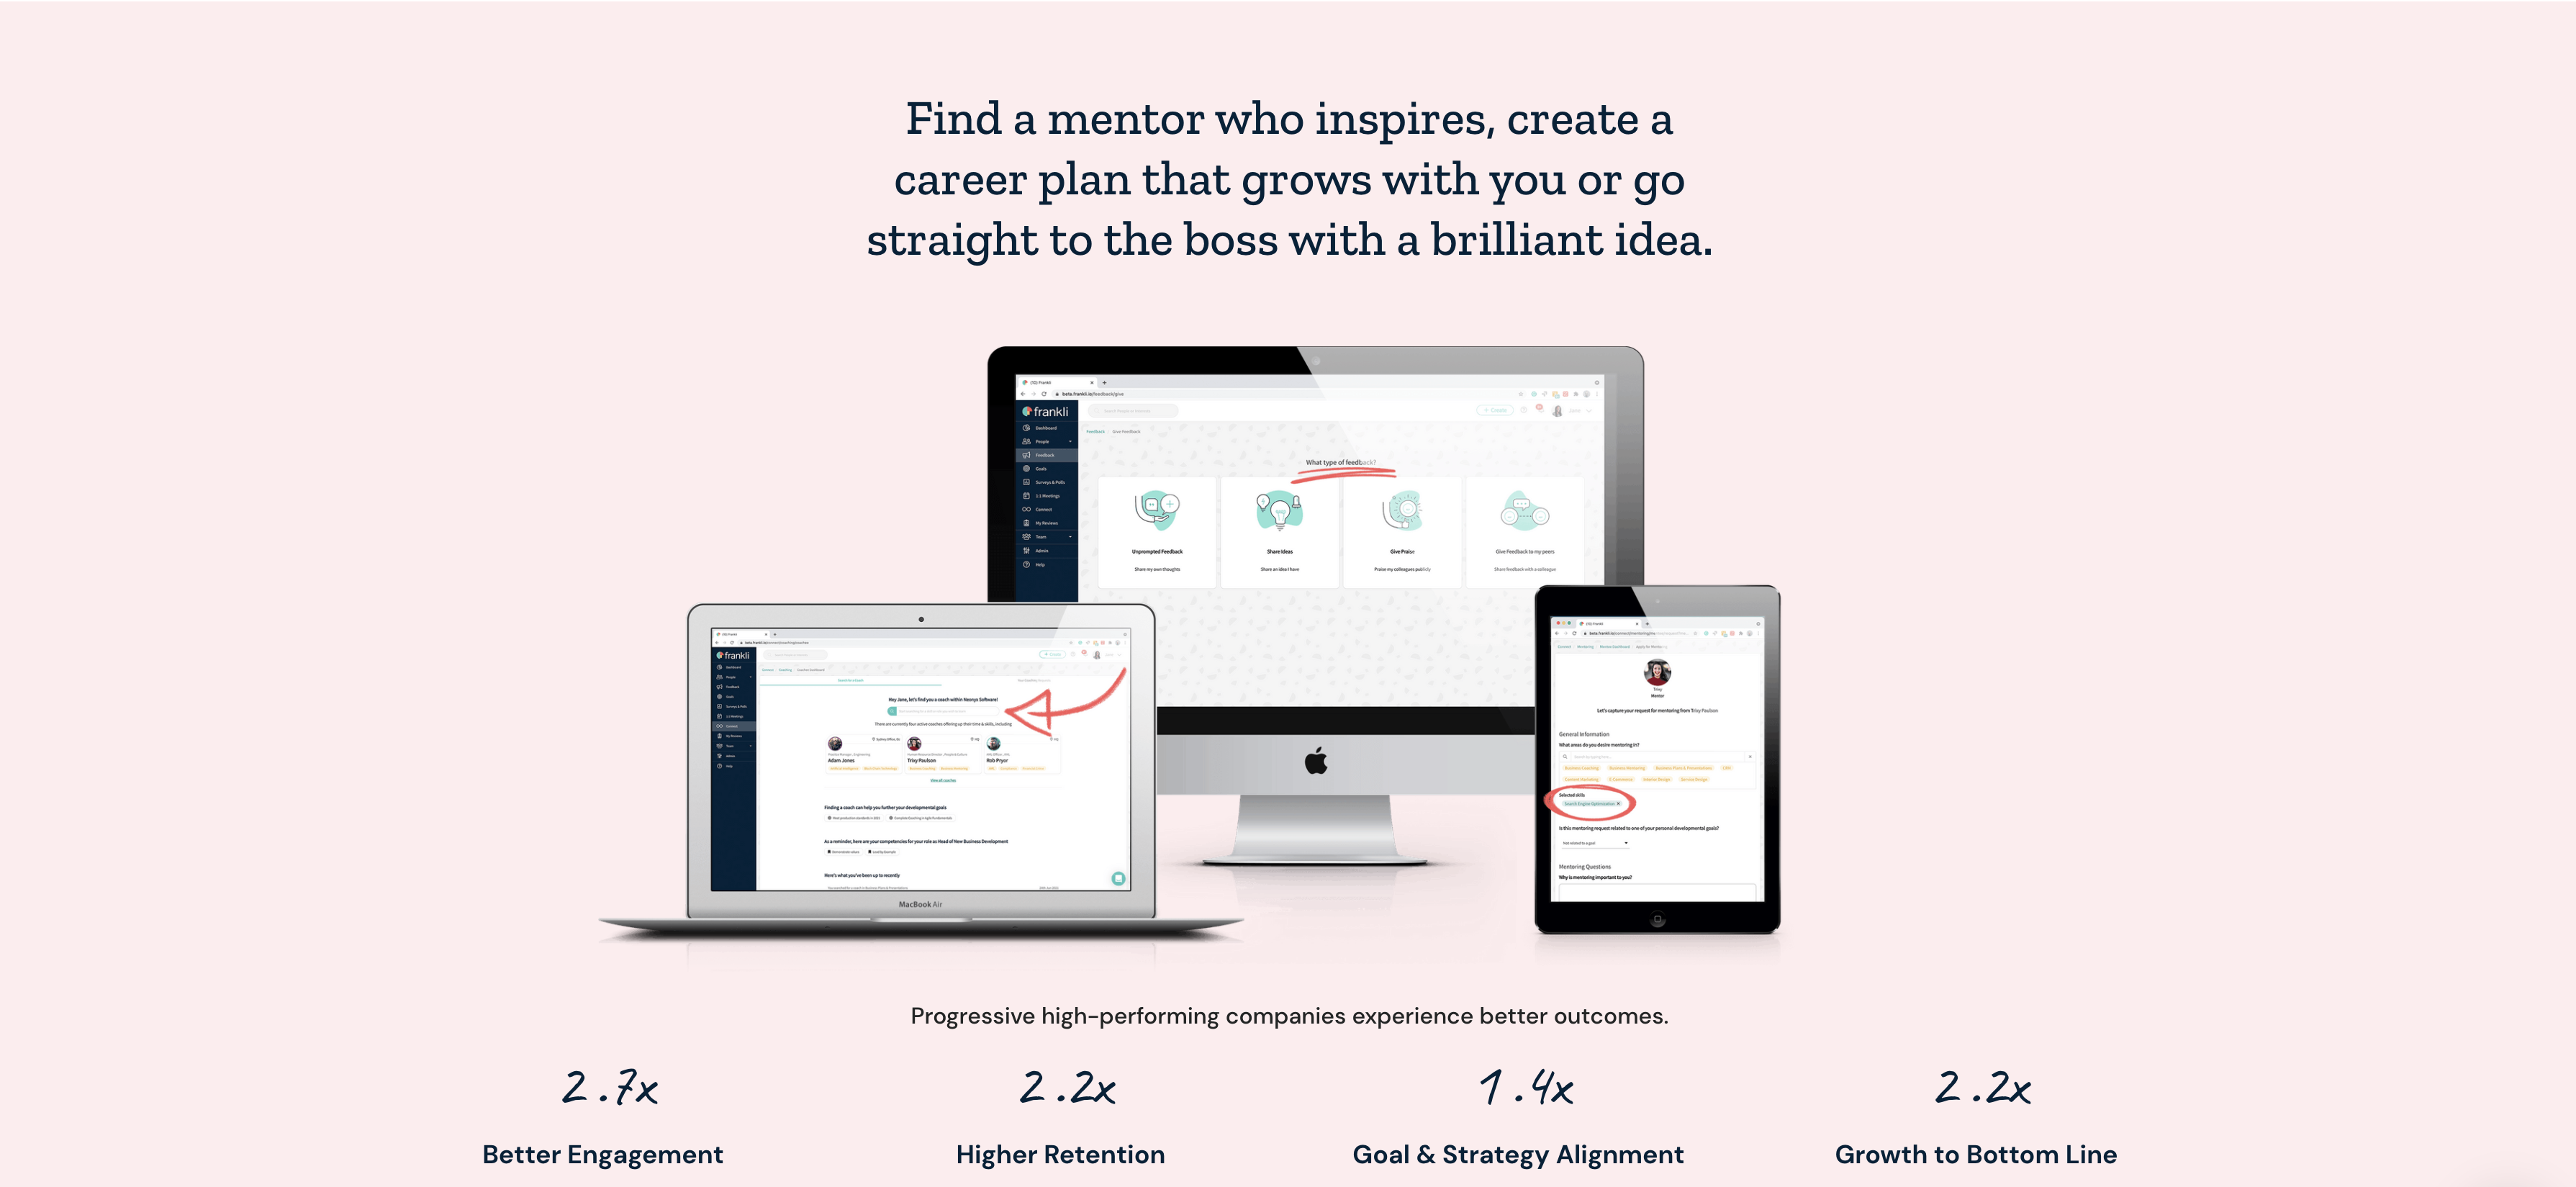 Find a mentor who inspires, create a career plan that grows with you or go straight to the boss with a brilliant idea.